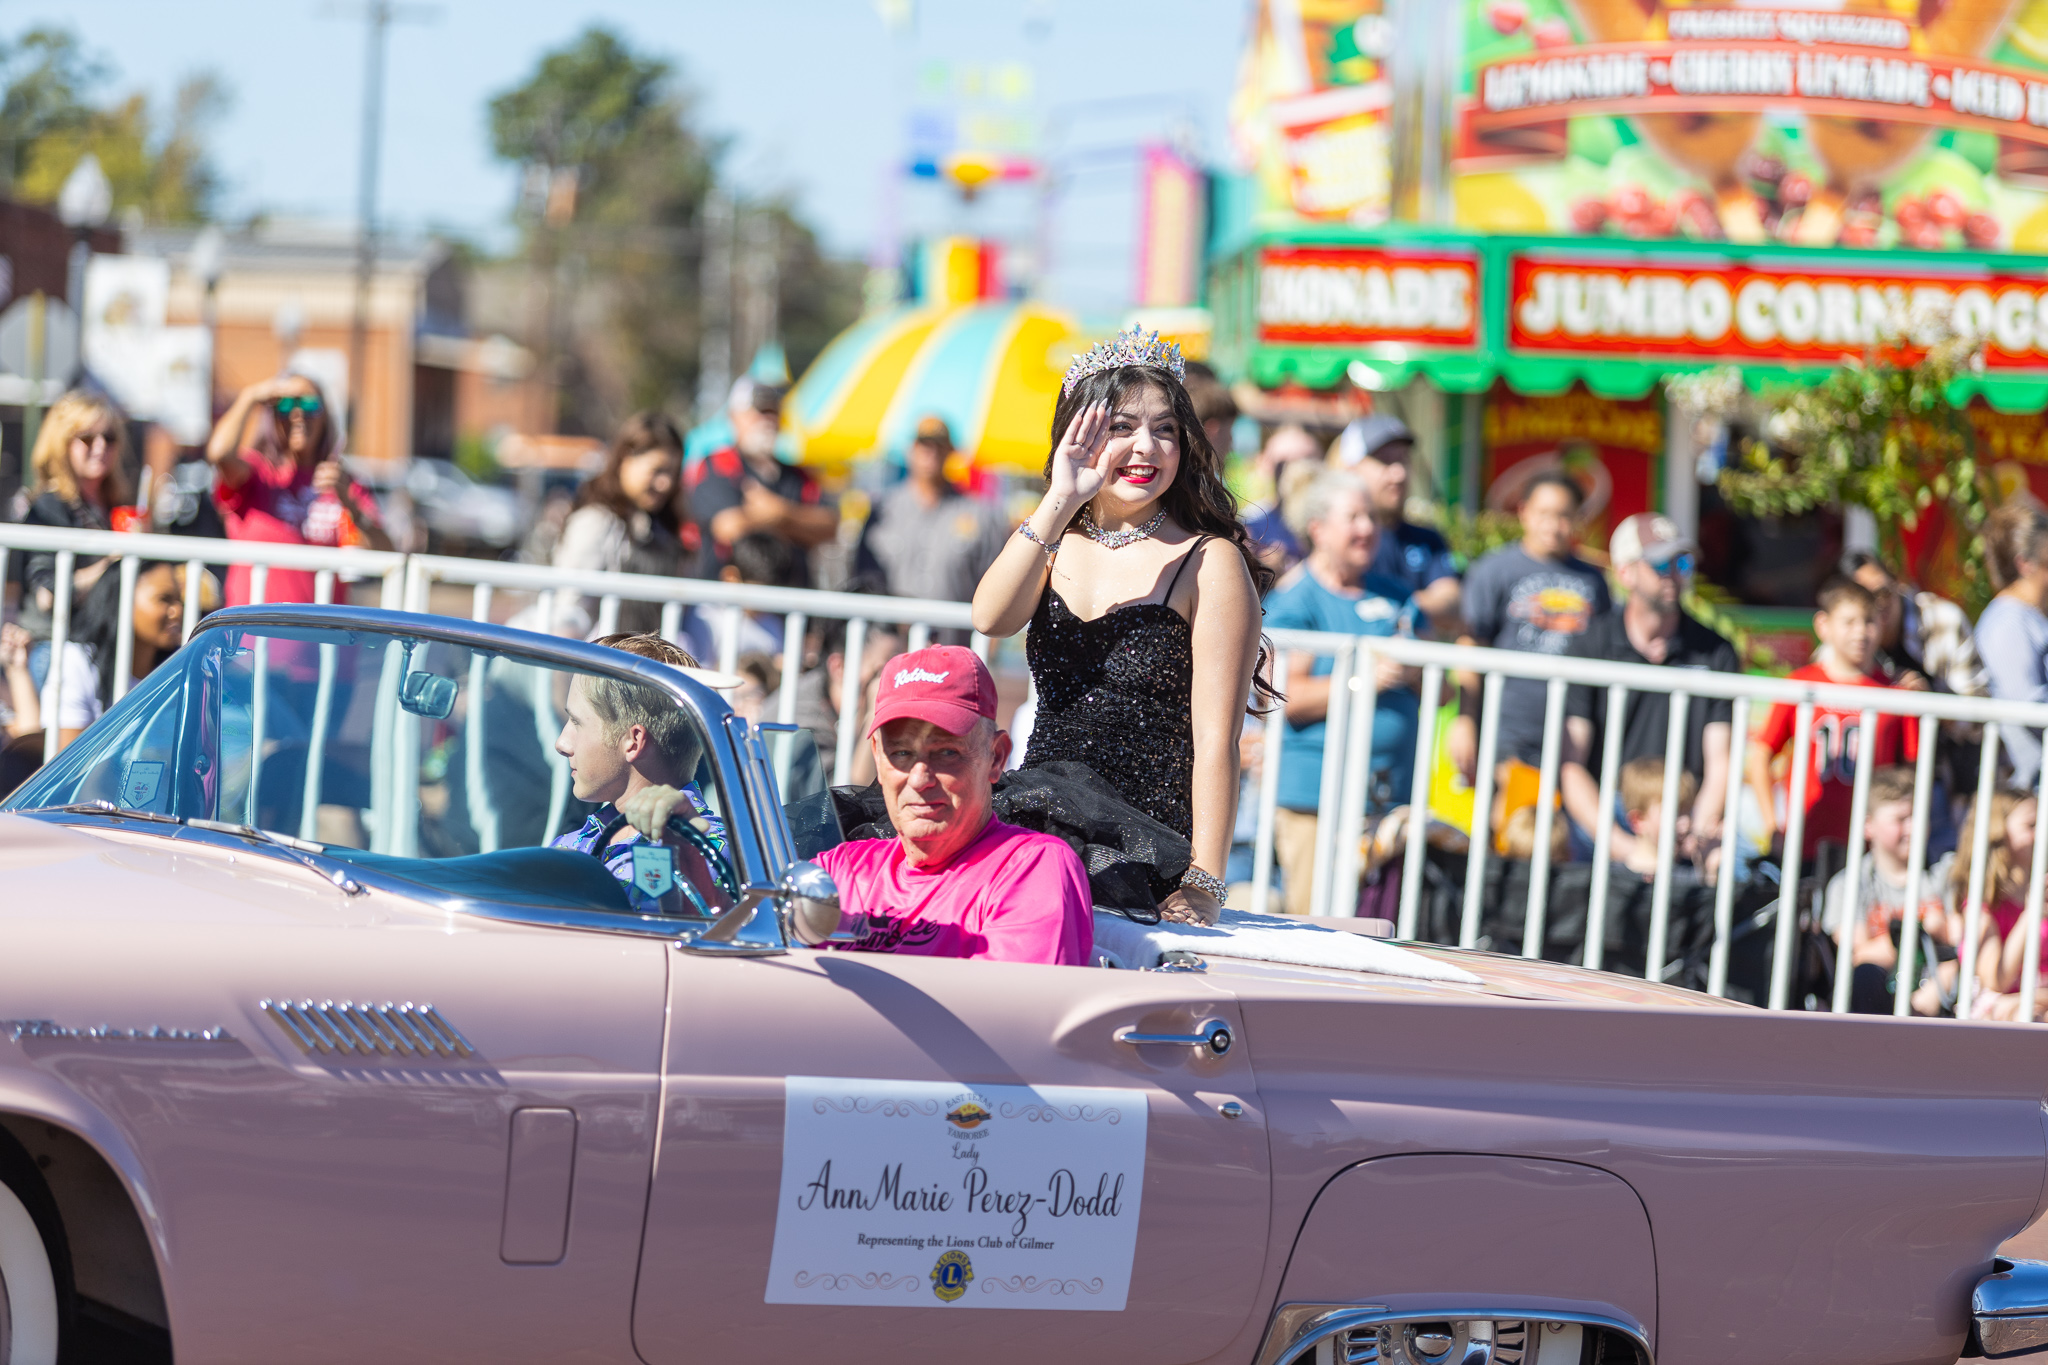 A pink car in a parade.